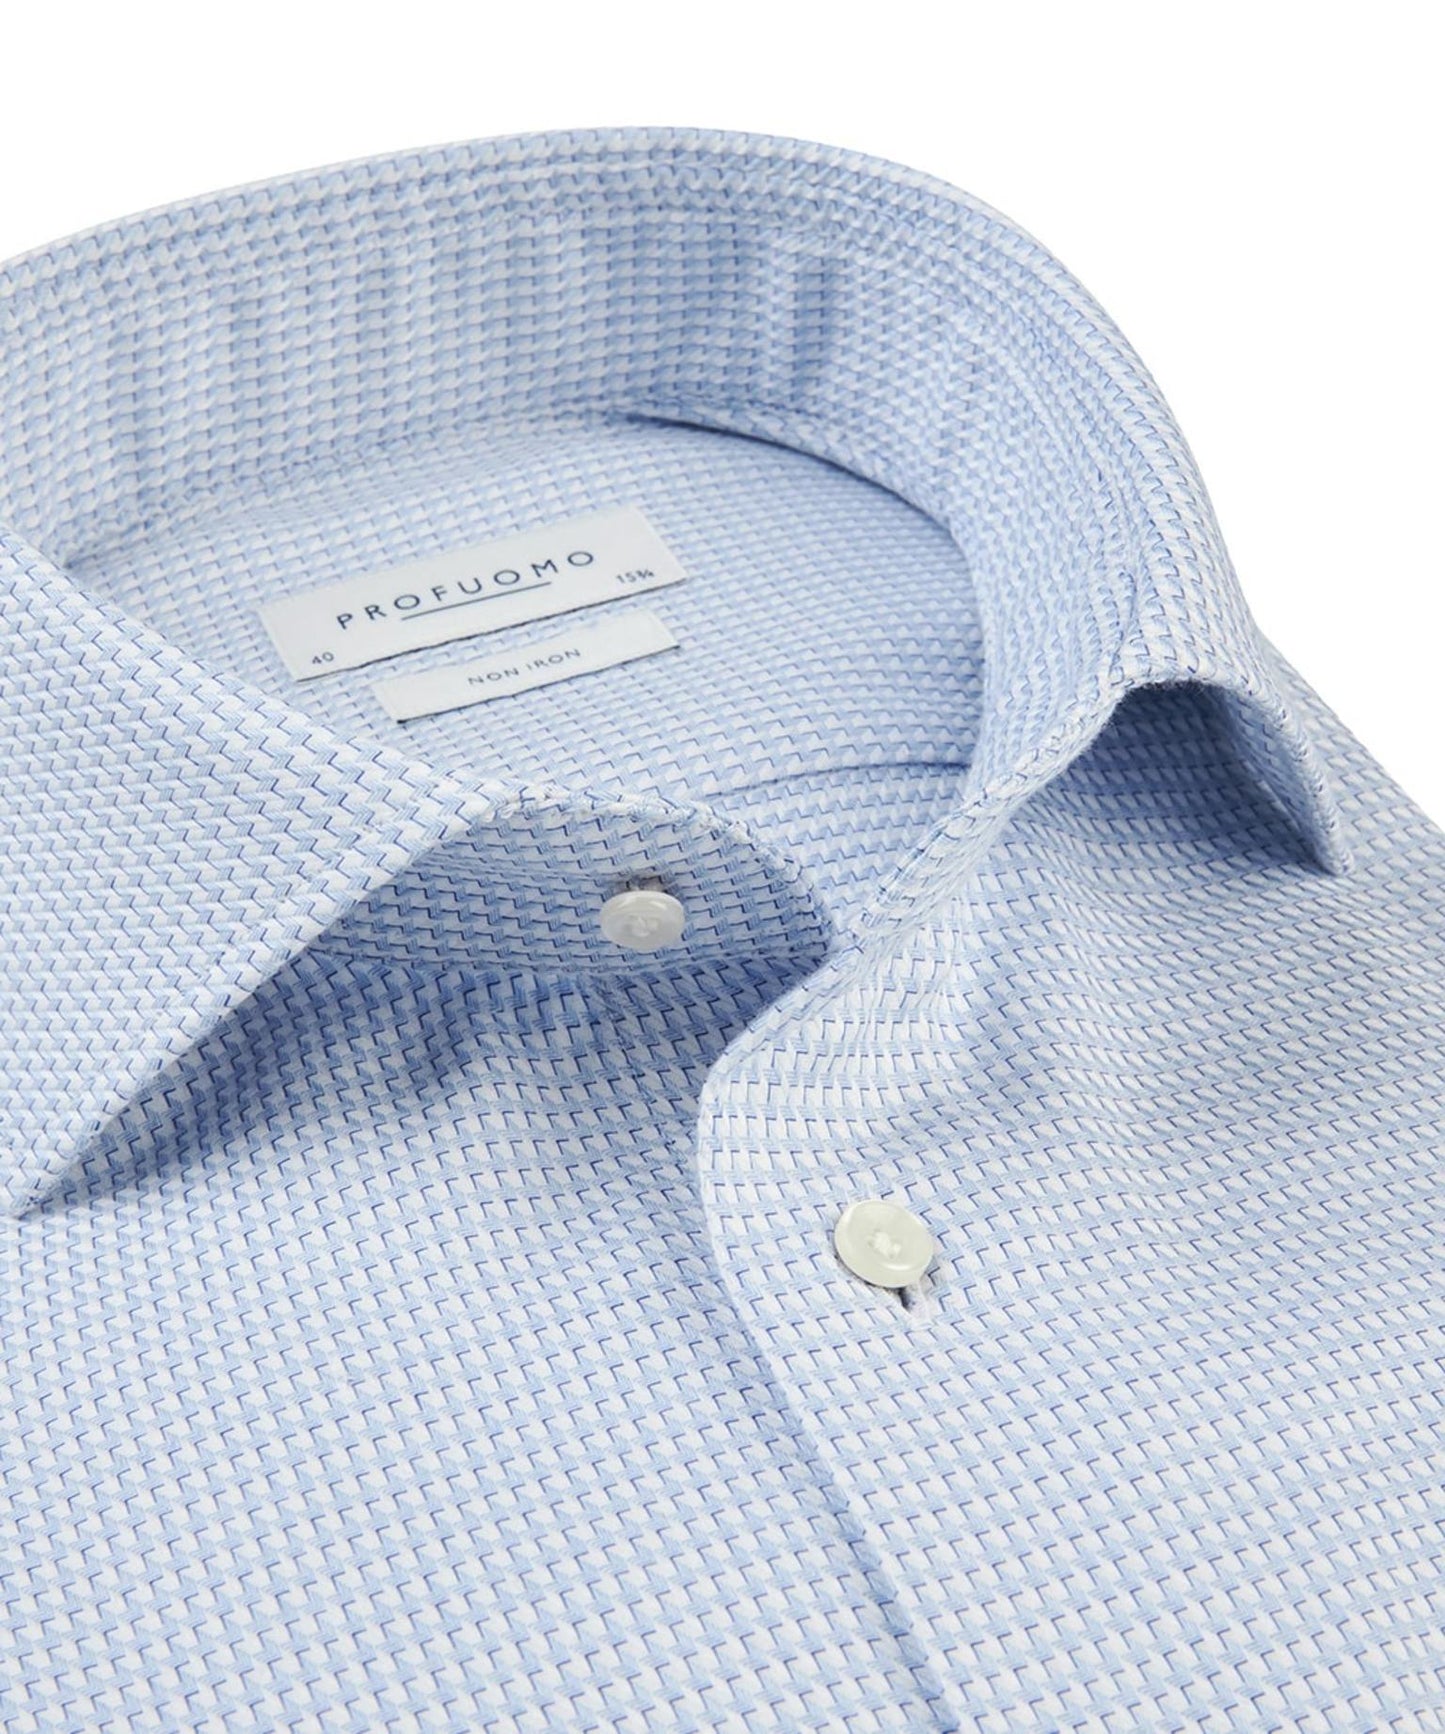 Blue cotton slim fit shirt with print Profuomo - PPTH30026A